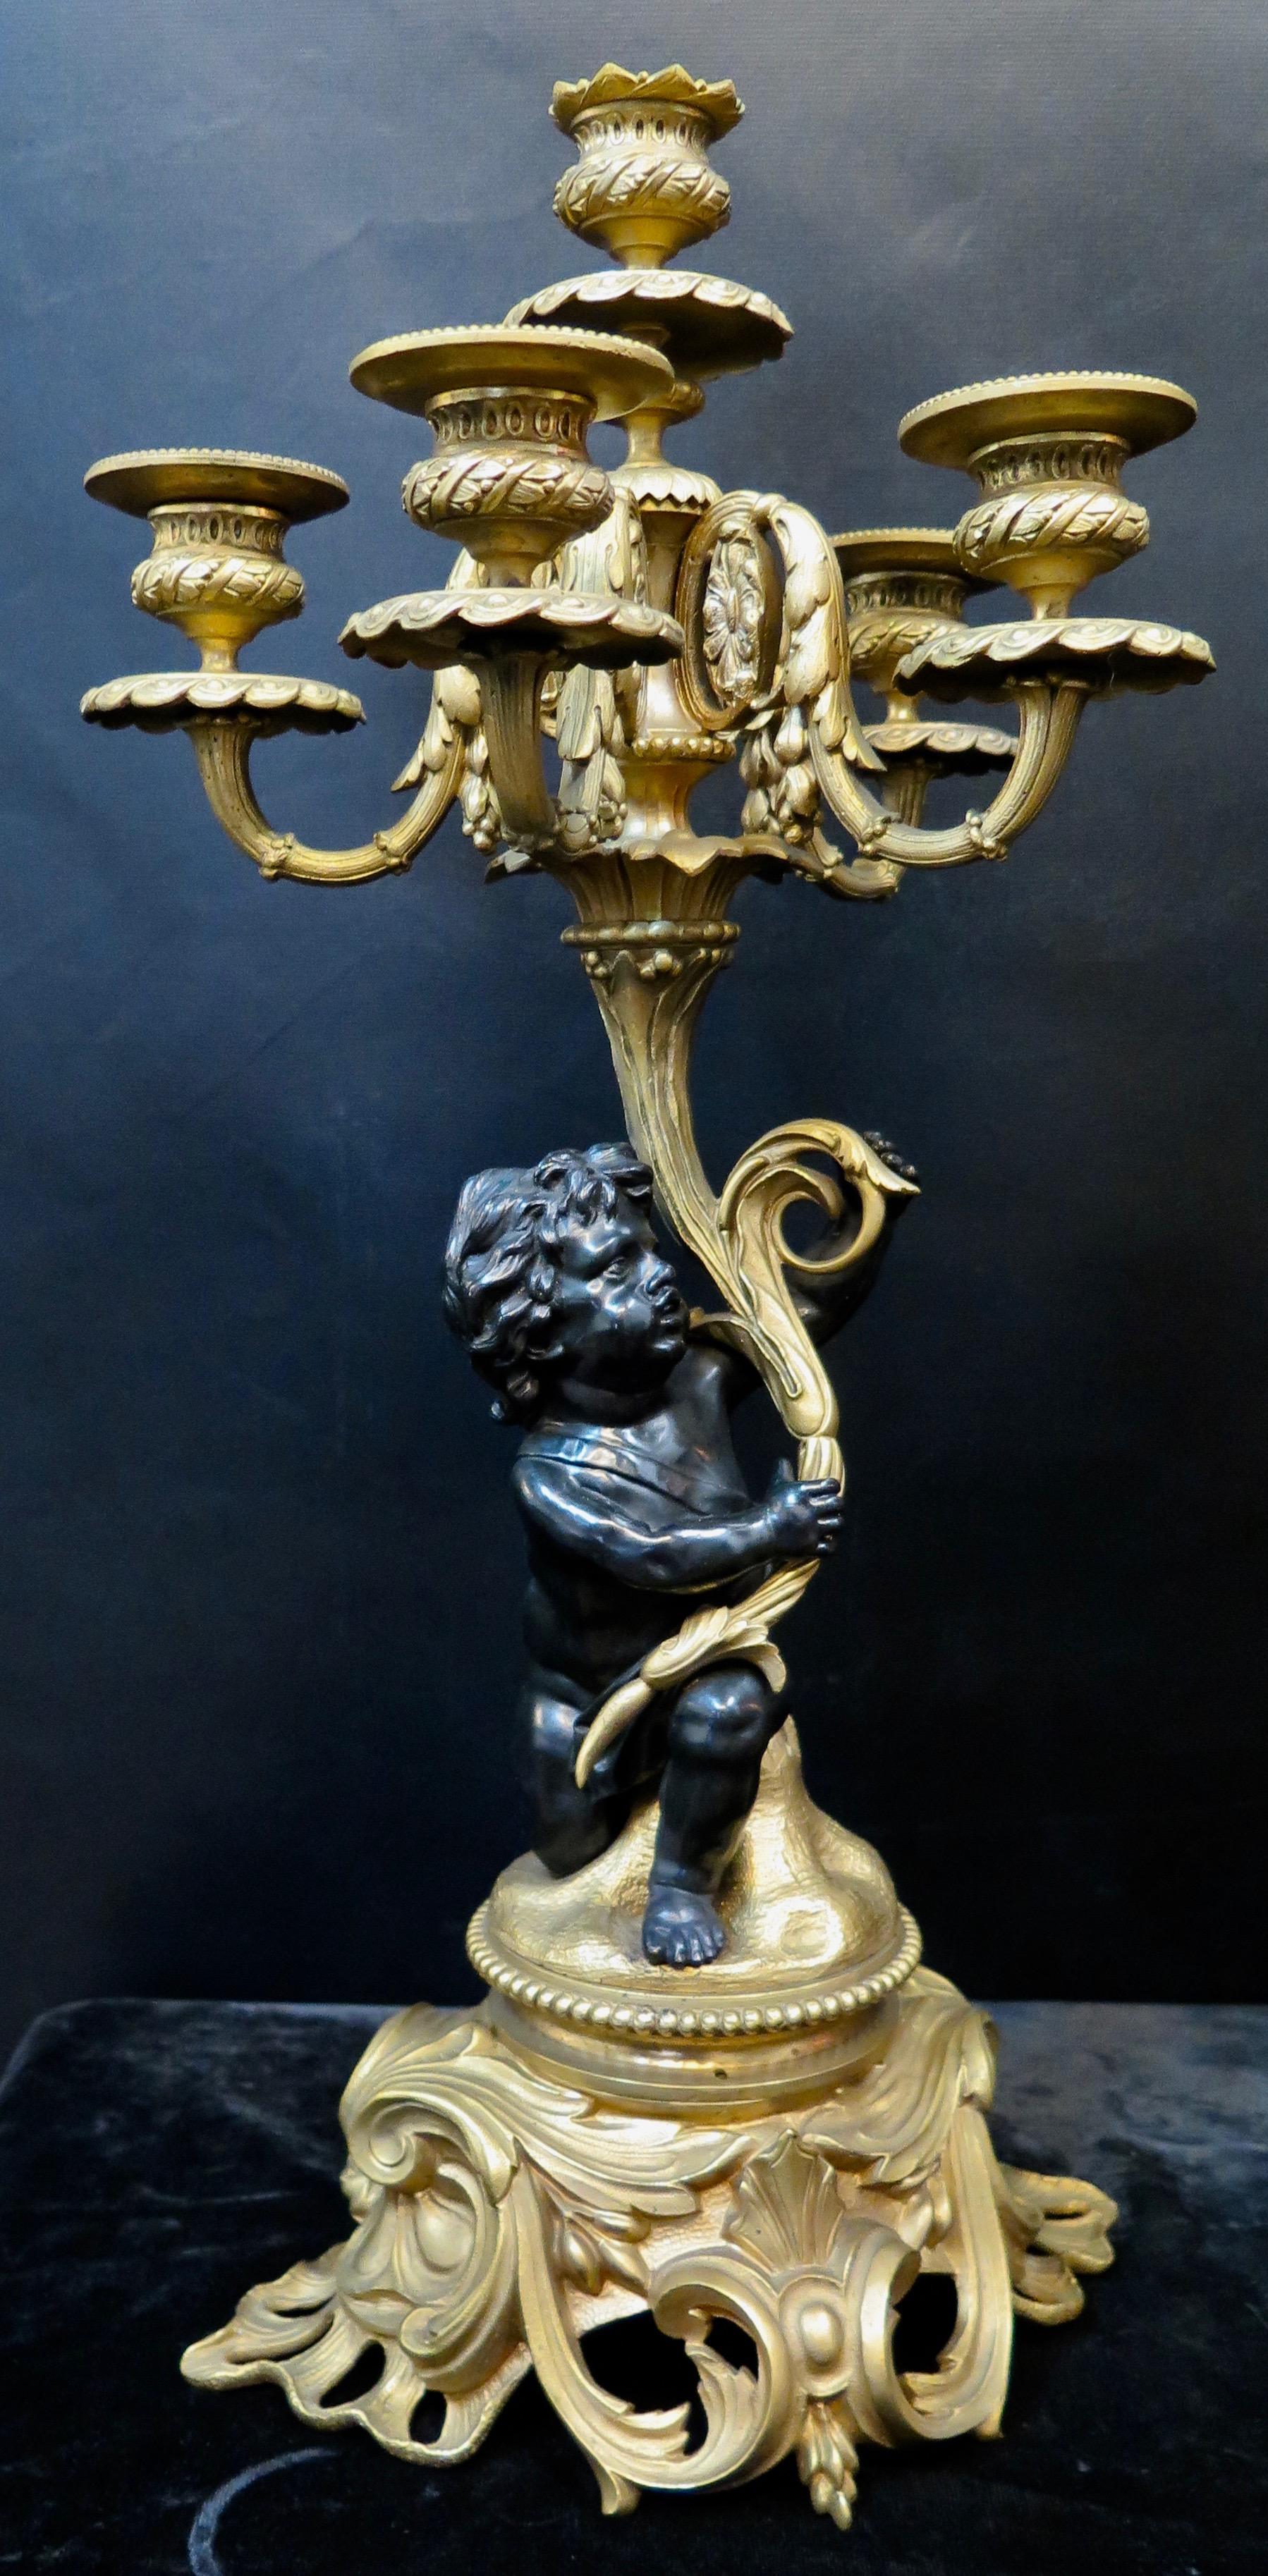 This fine antique pair of French Louis XV style gilt and patinated bronze candelabra date from the 19th century. Detailed sculpted patinated putti figures are prominently positioned holding a flowing botanical topped with five candleholders with